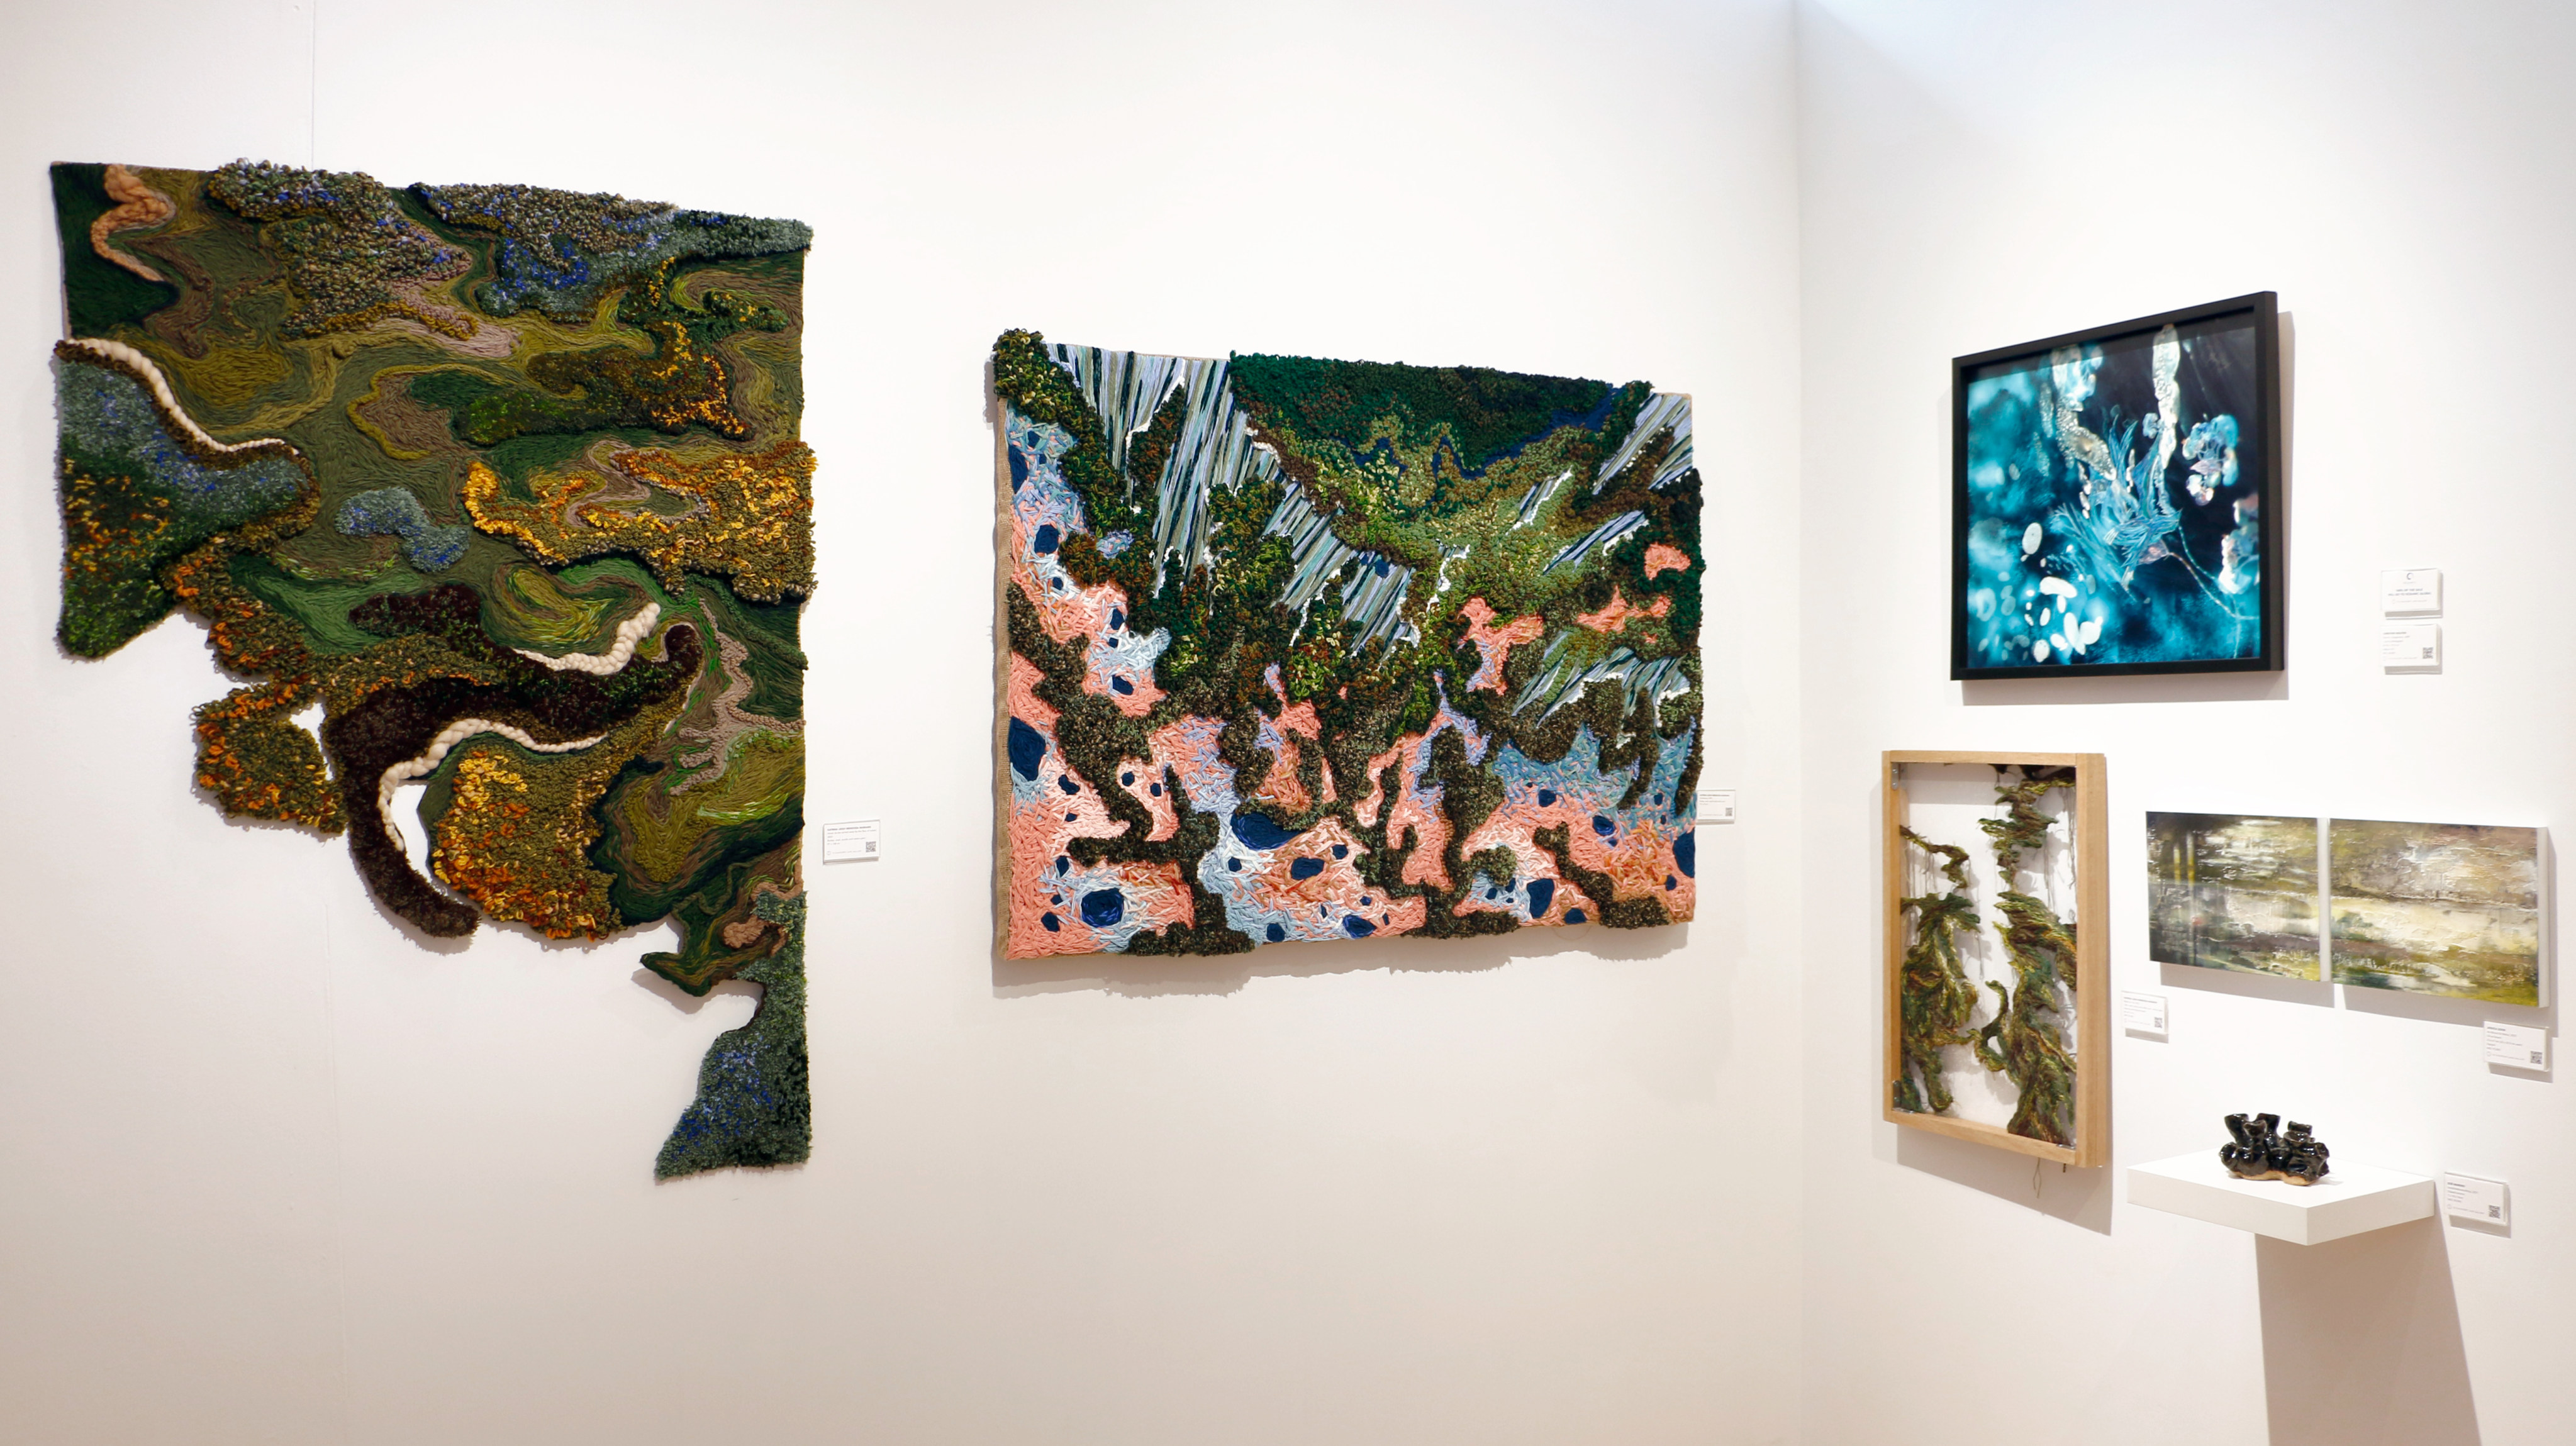 “Faces of Gaia”, an exhibition of art inspired by nature, the ocean and the Earth goddess Gaia, is co-presented in Hong Kong by 10 Chancery Lane Gallery and non- profit Oceanic Global.  Photo: 10 Chancery Lane Gallery